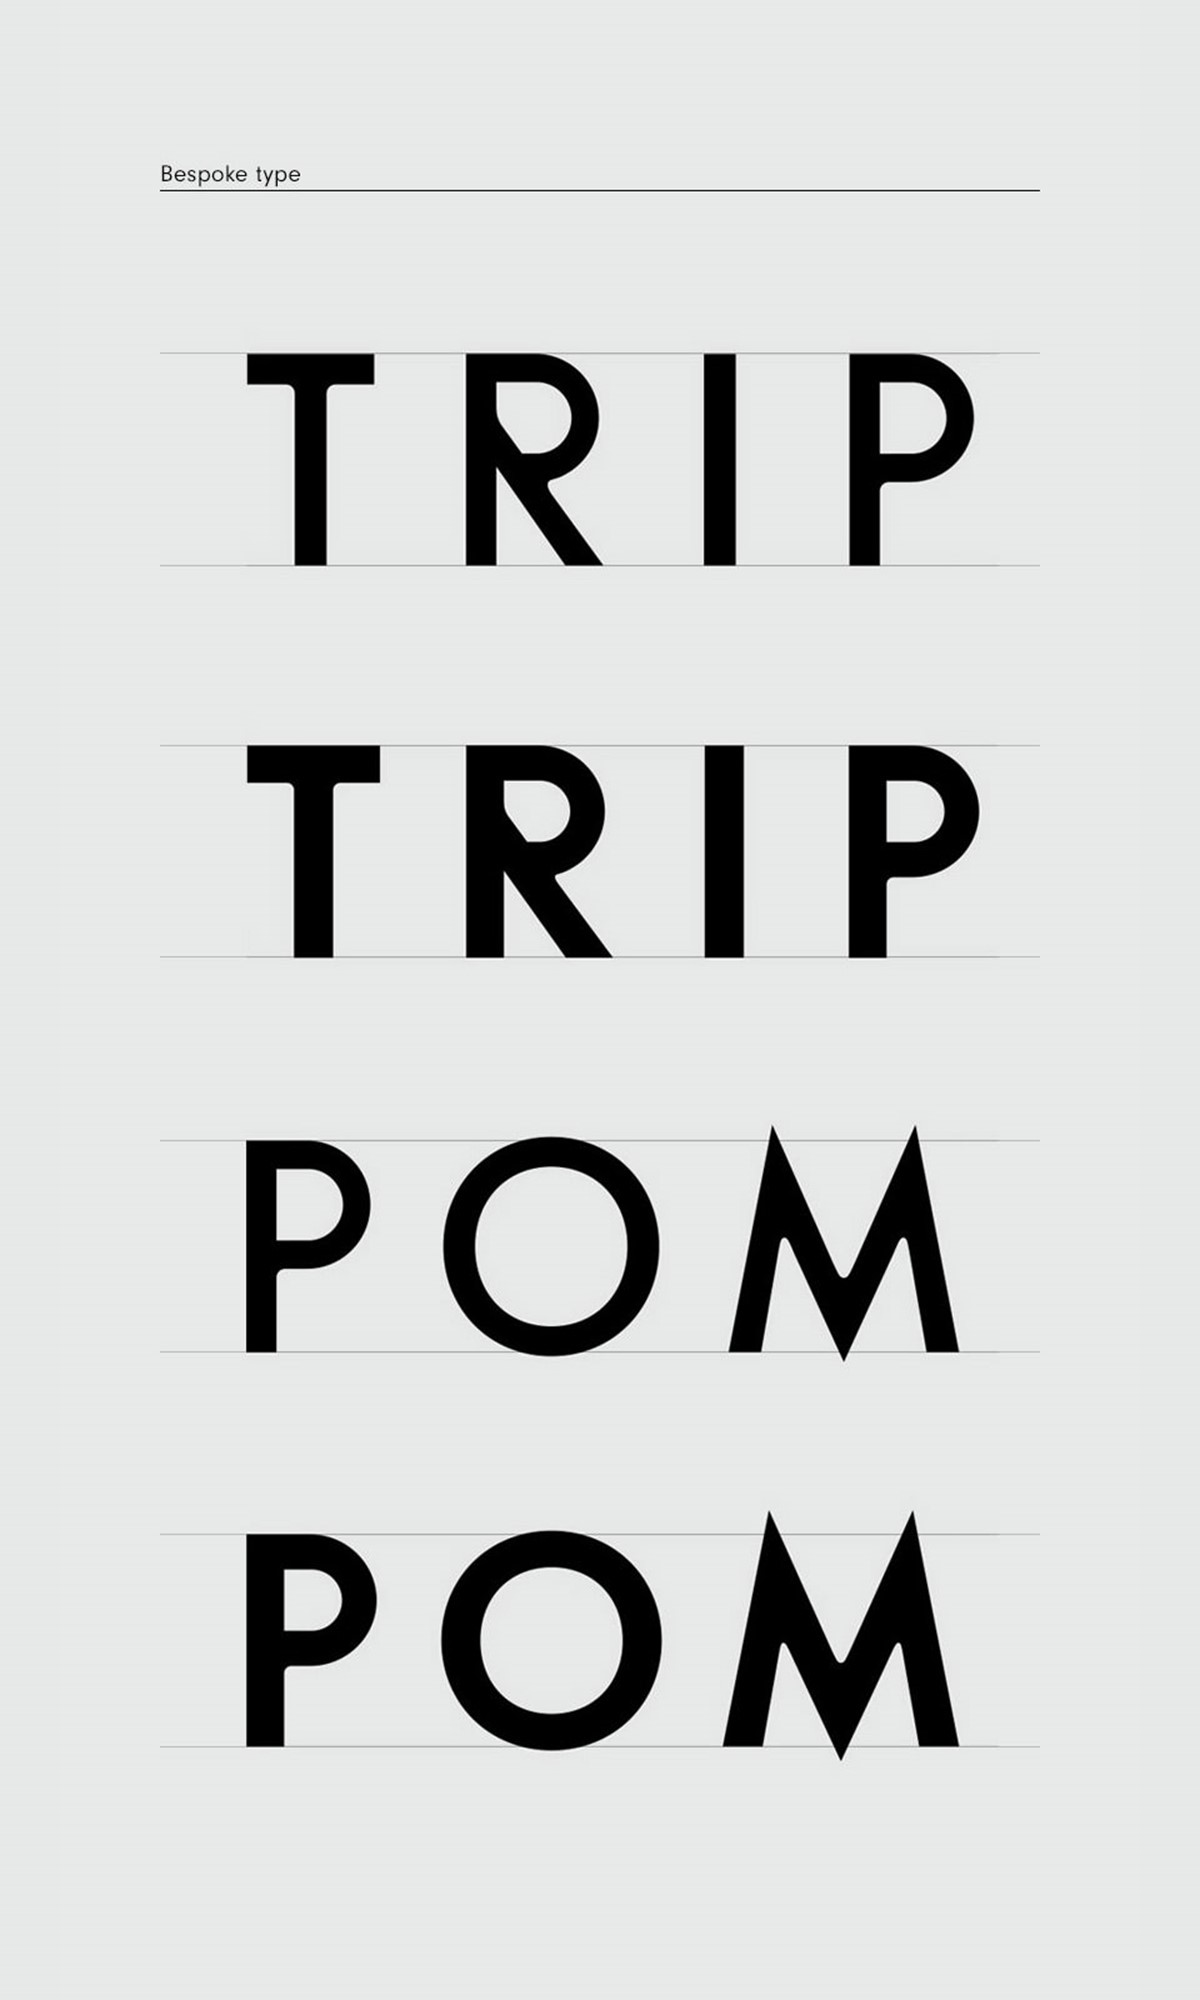 TRIPOM. Brand guidelines – bespoke logotype close-up. Identity design by Superfried.